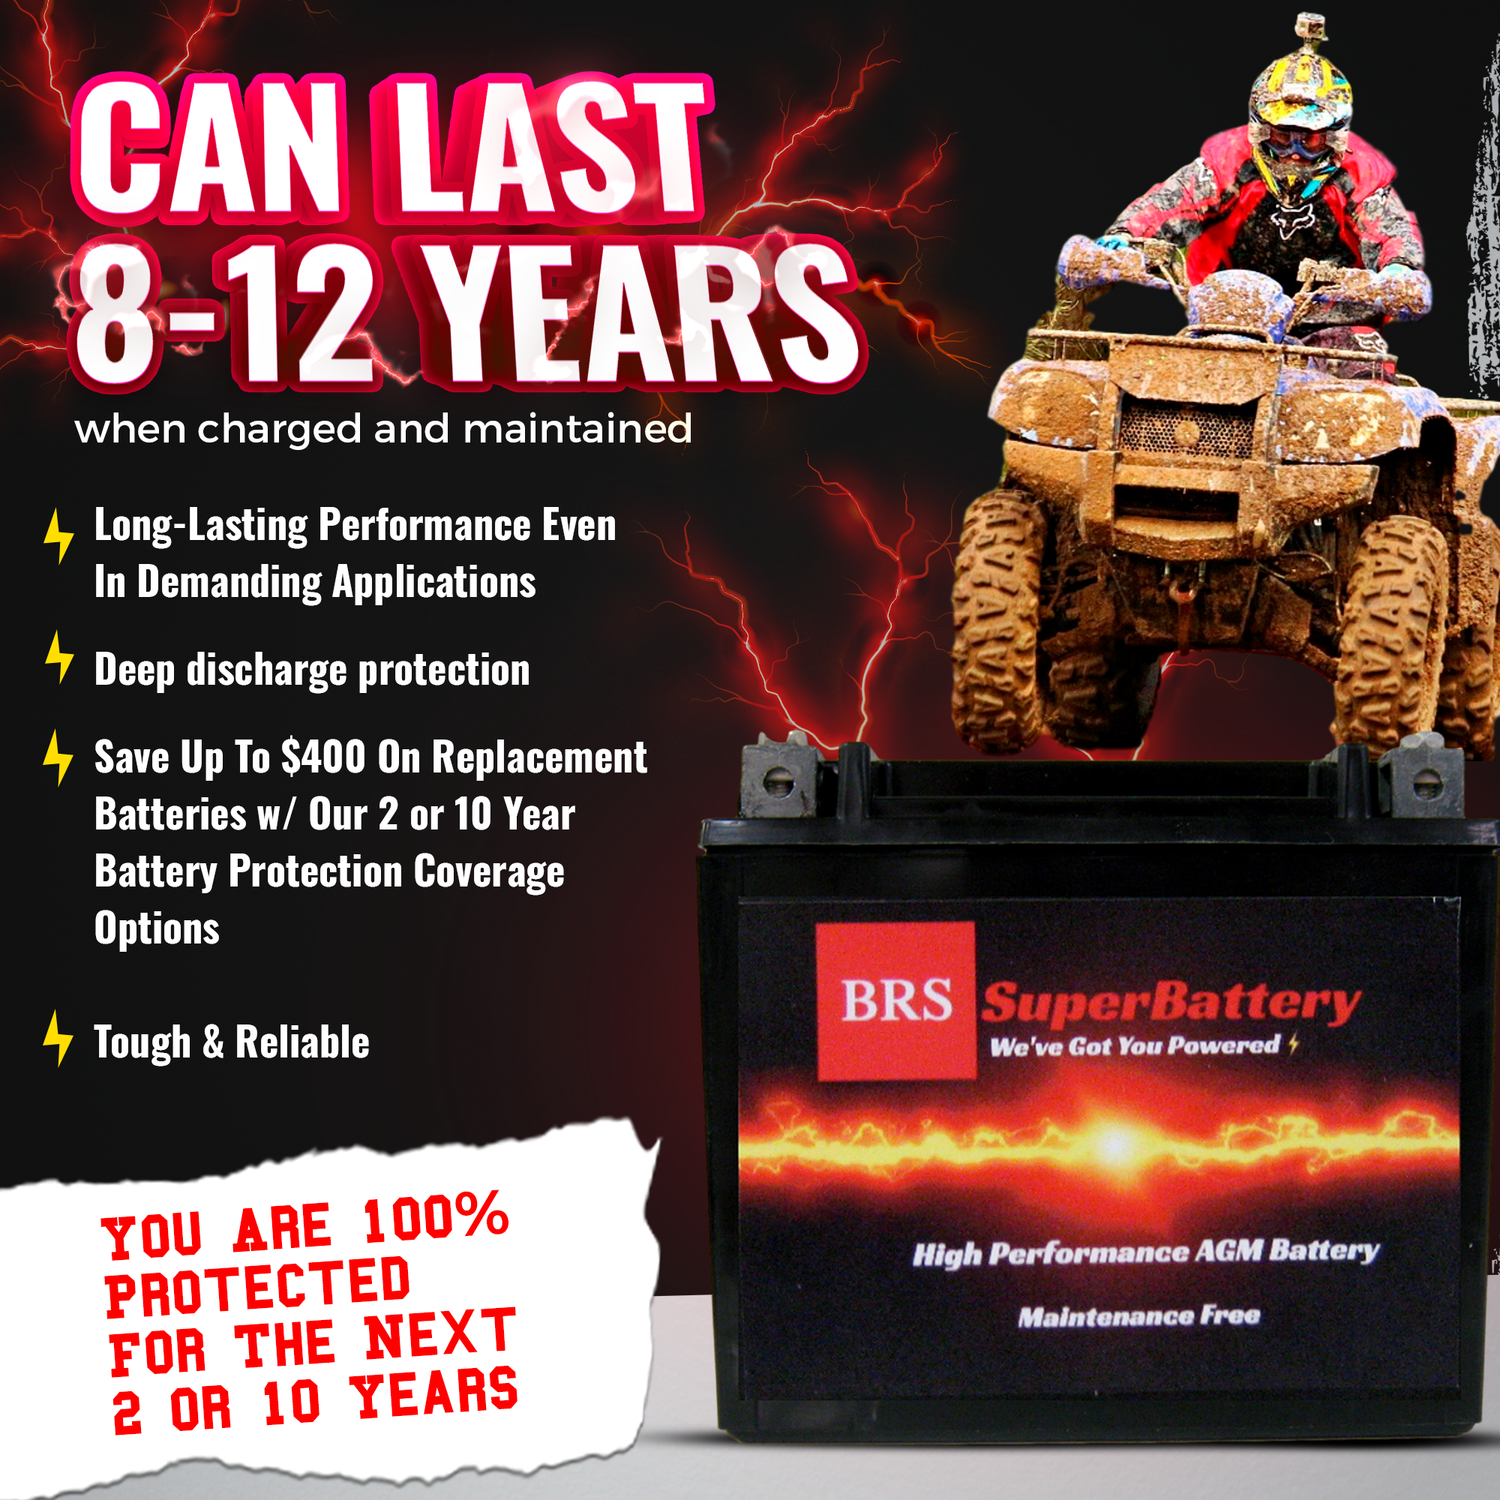 BRS30L-BS 12v High Performance Sealed AGM PowerSport 10 Year Battery - BRS Super Battery